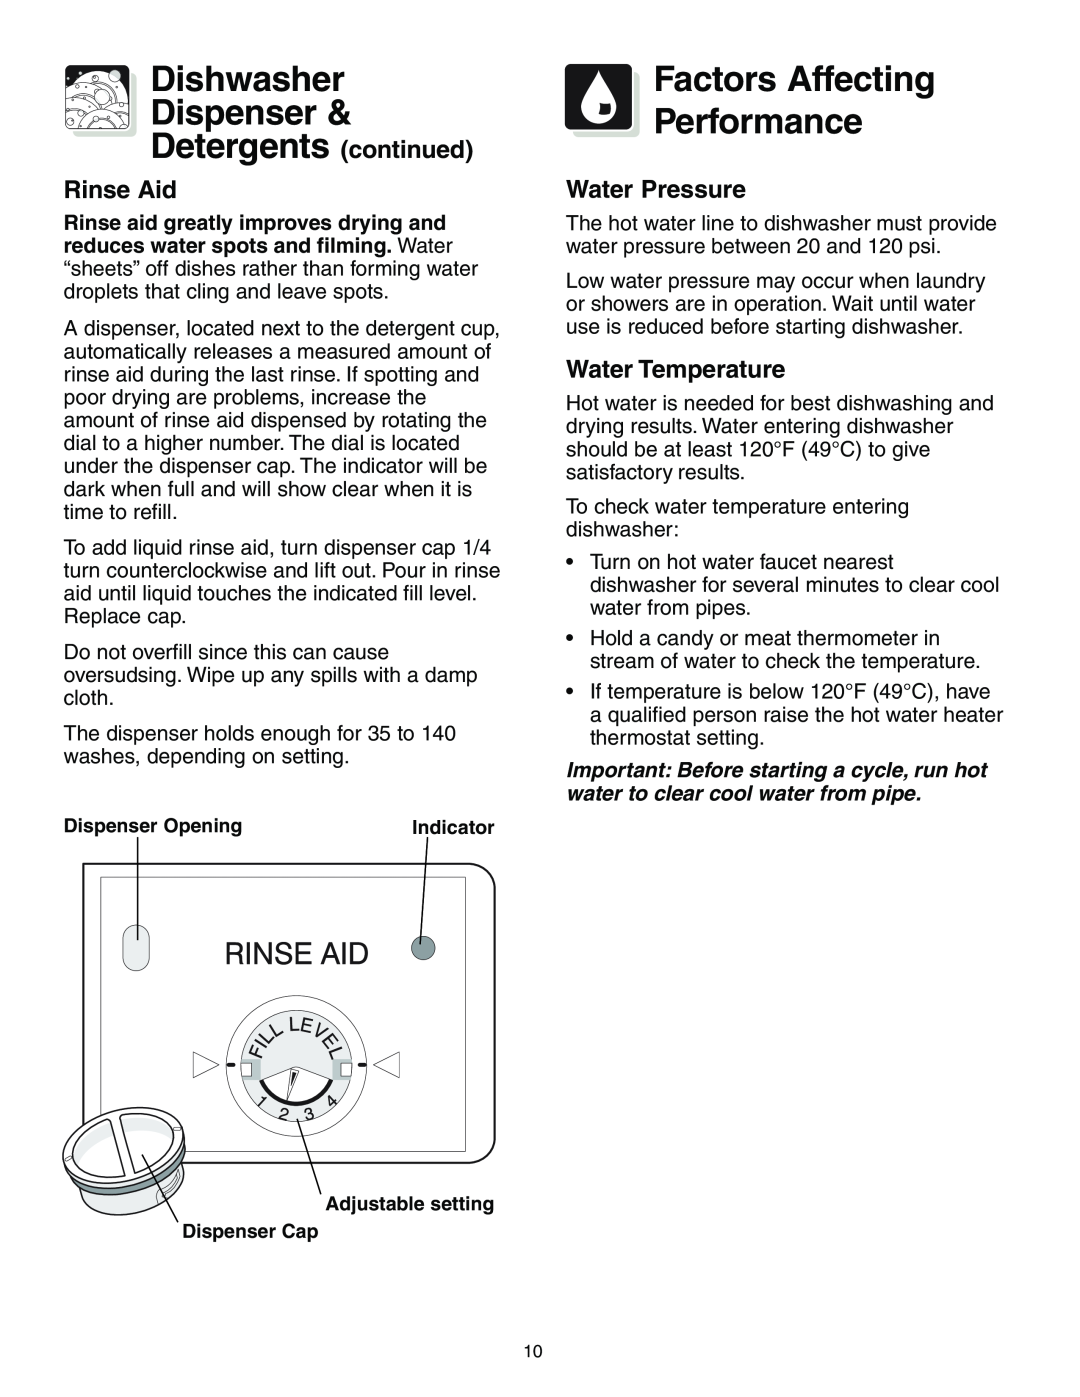 Frigidaire 650 Series Dishwasher Dispenser Detergents continued, Factors Affecting Performance, Rinse Aid, Water Pressure 